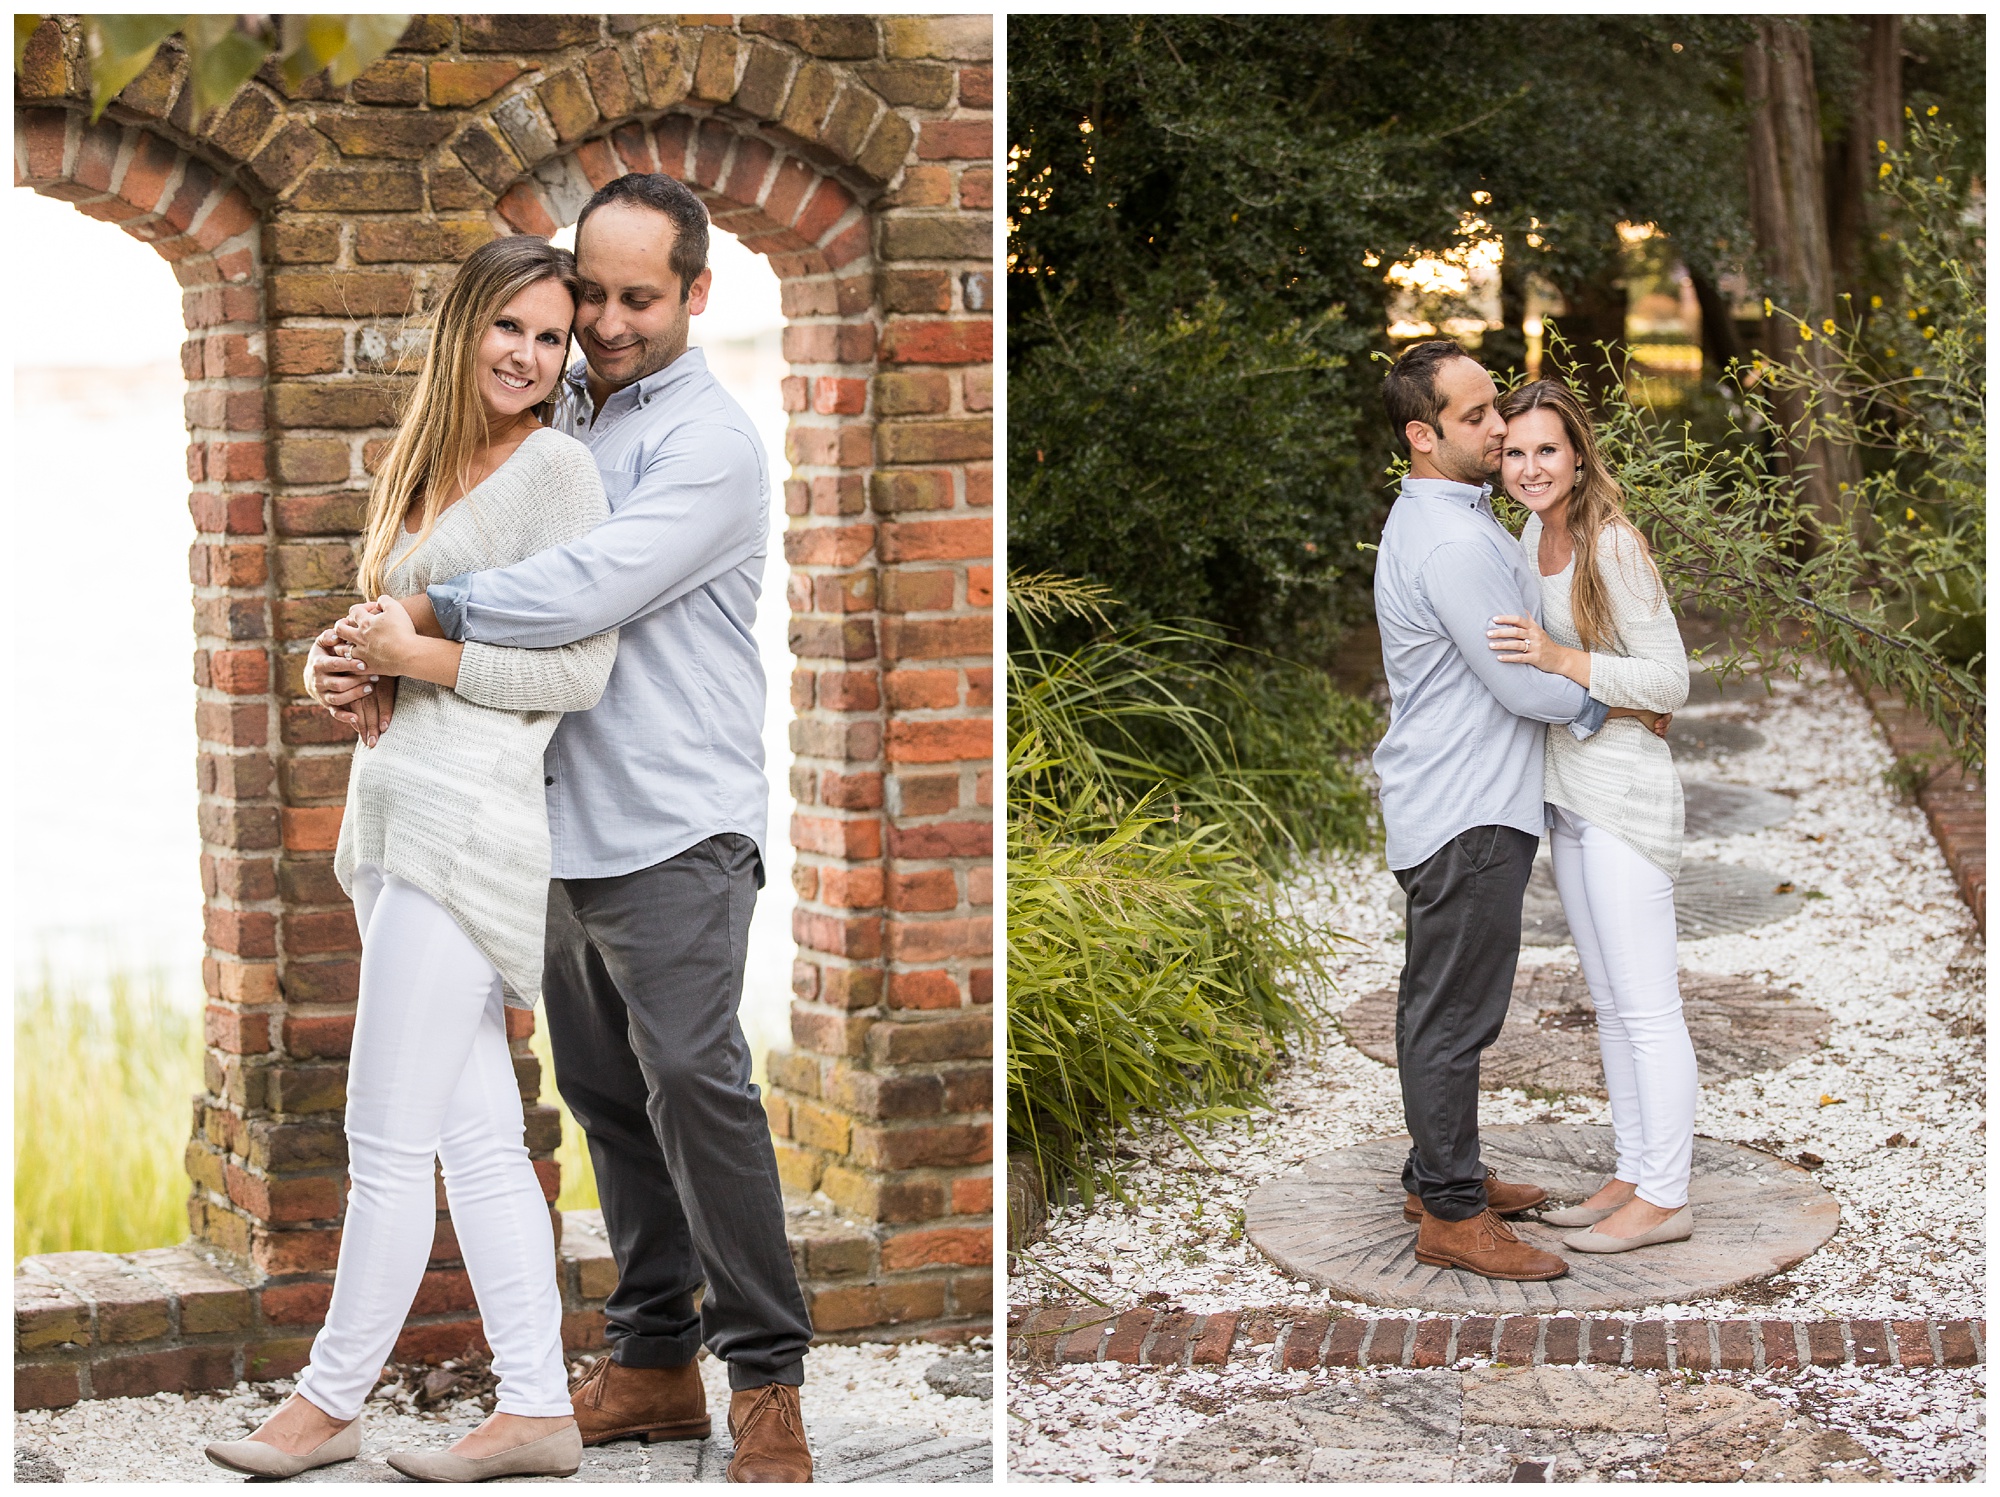 Emily & Nathan | Hermitage Engagement Session